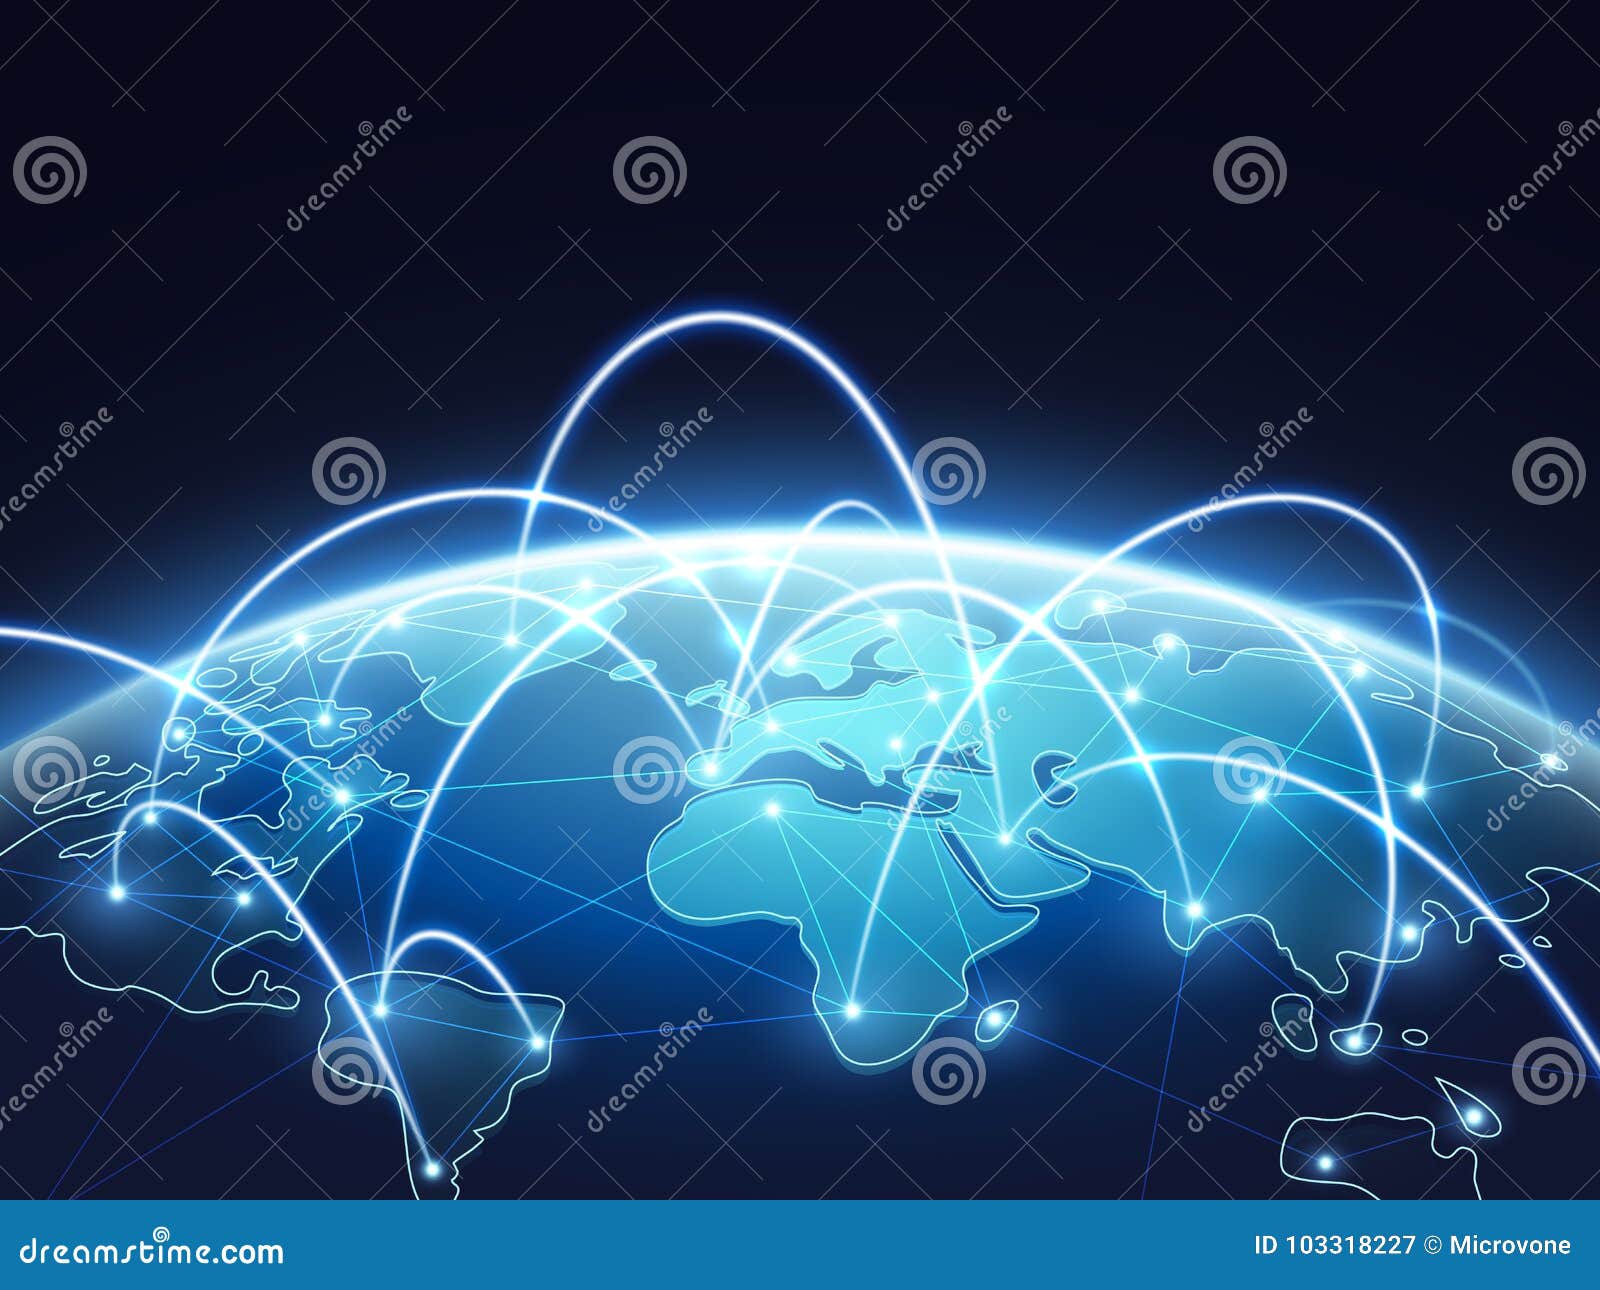 abstract network  concept with world globe. internet and global connection background